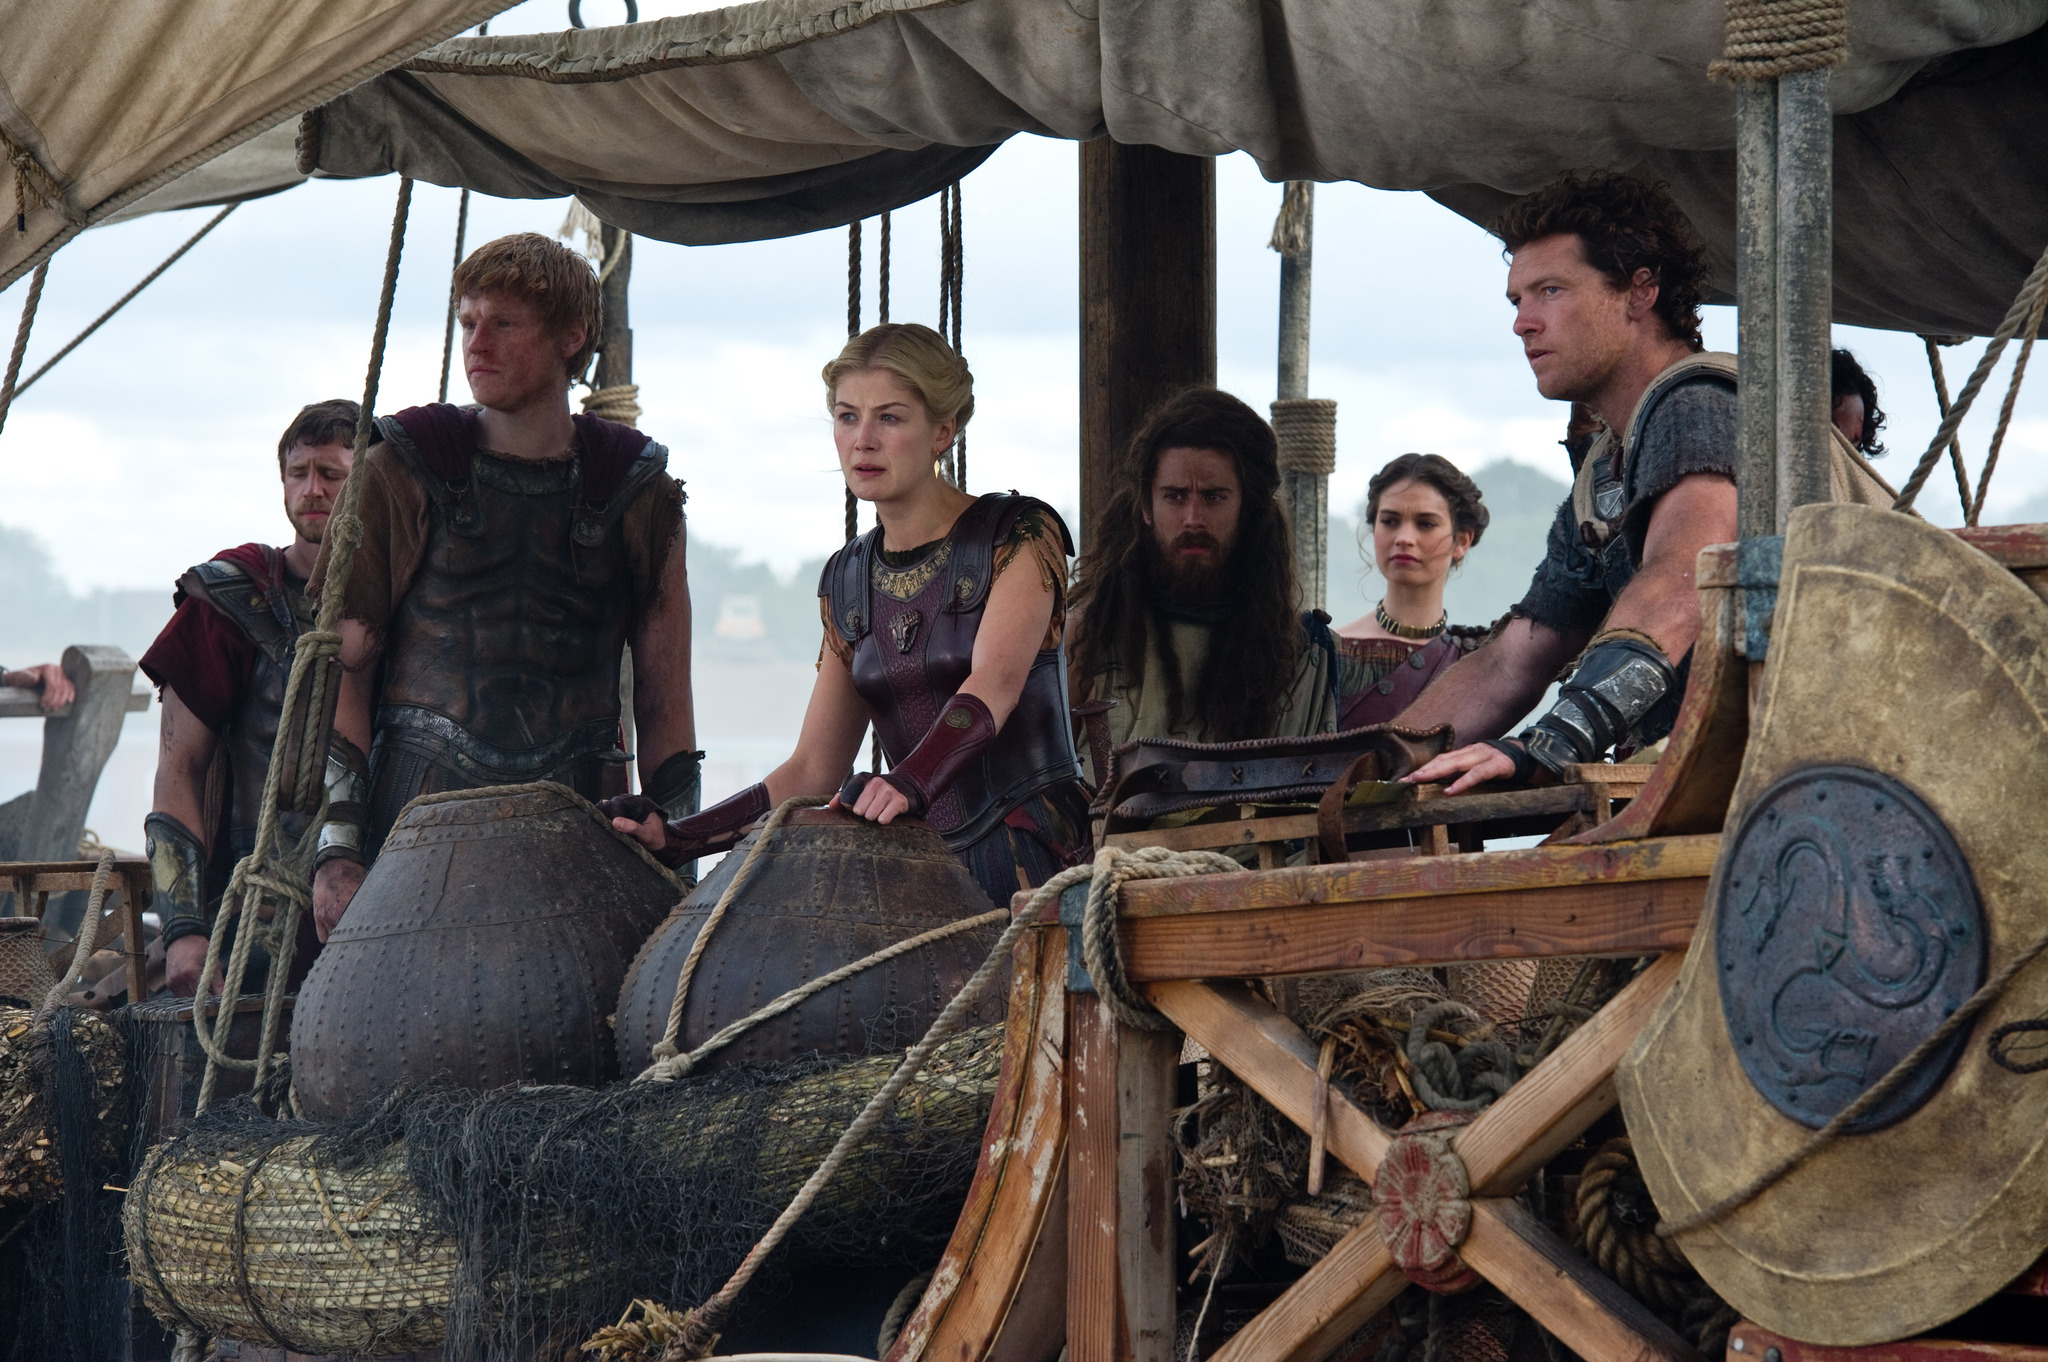 Still of Rosamund Pike, Sam Worthington, Toby Kebbell and Lily James in Titanu inirsis (2012)